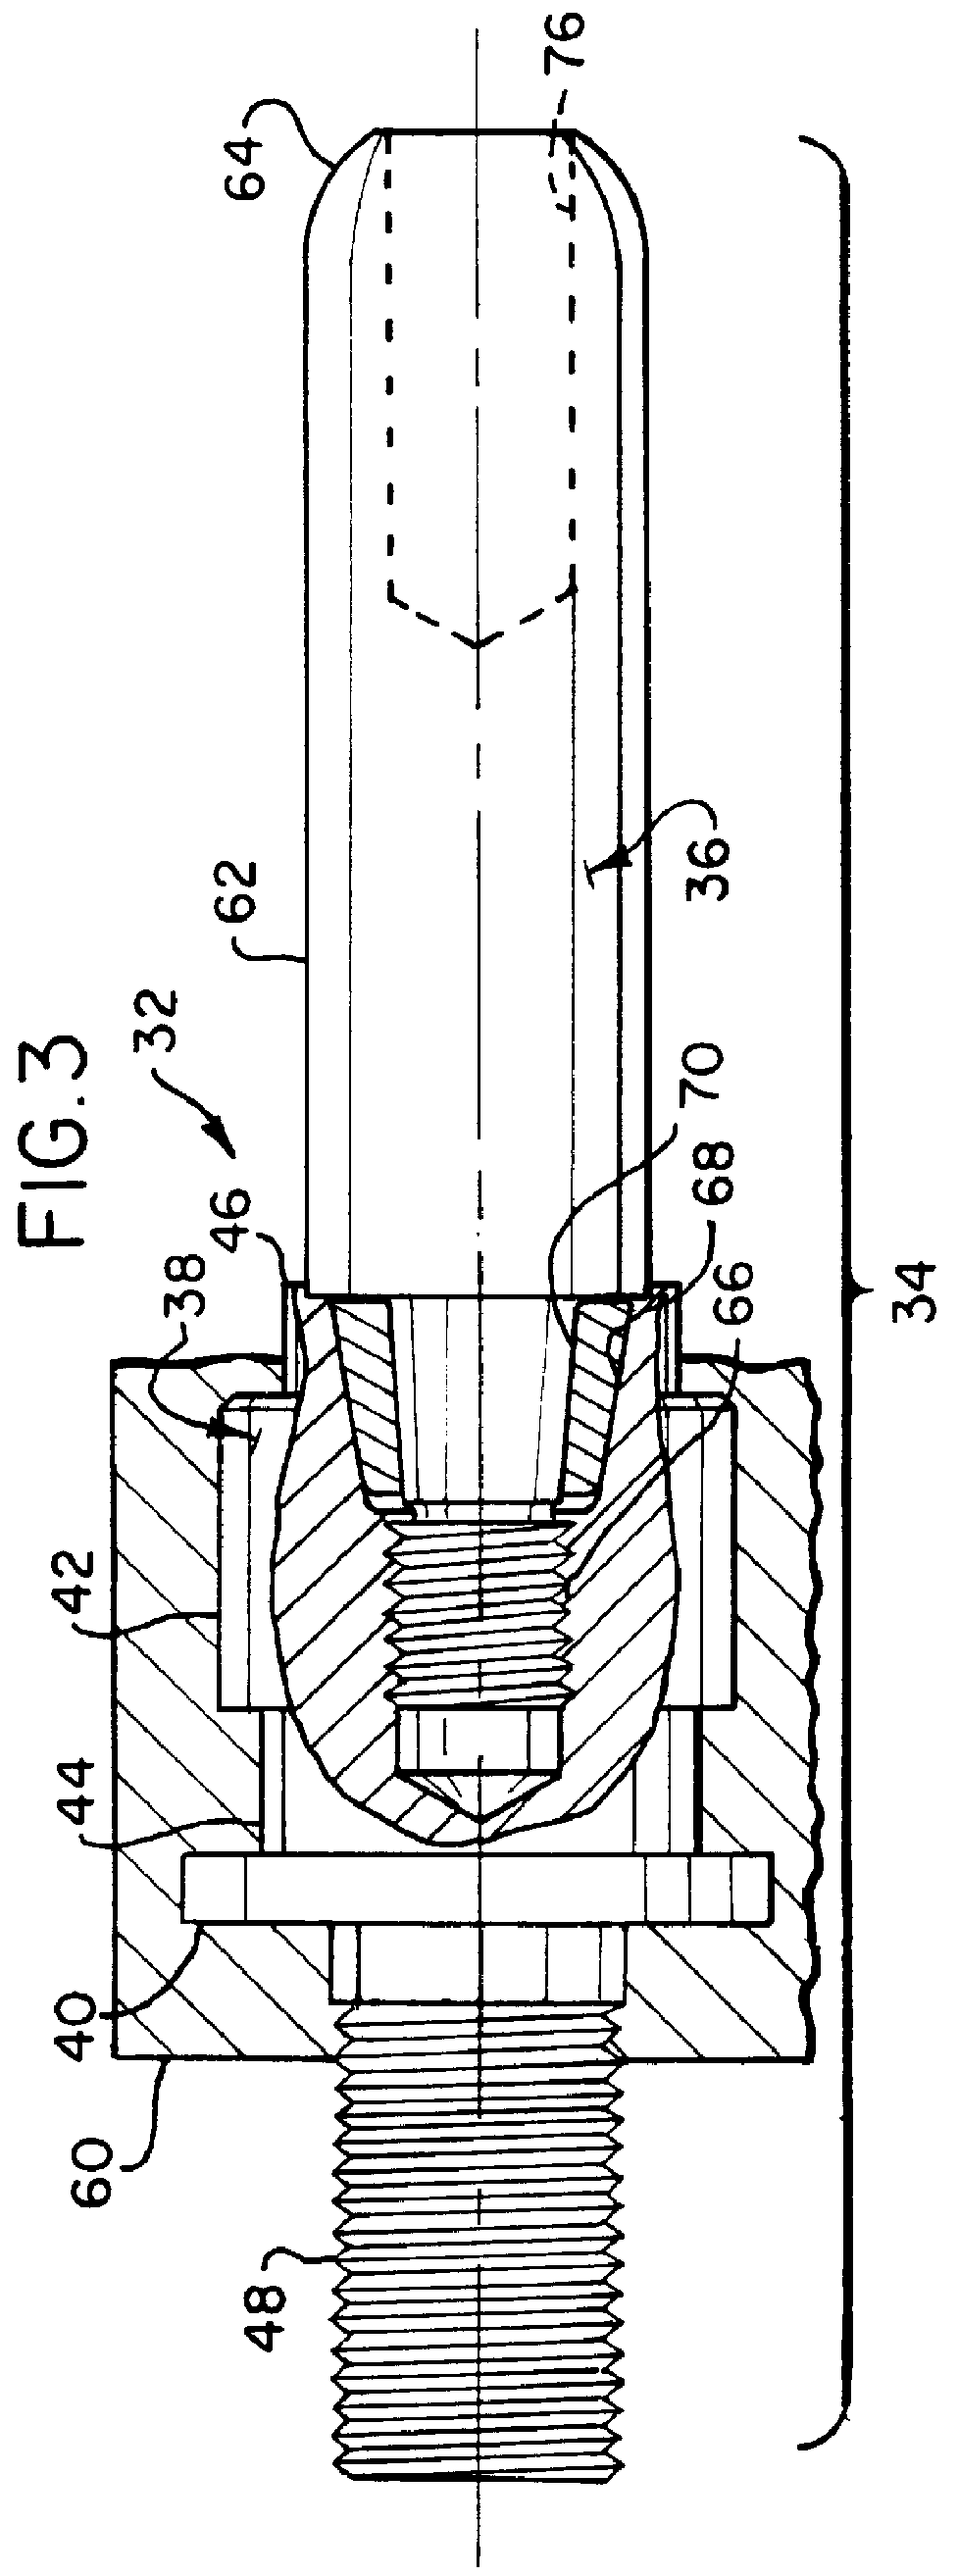 Electrical connector with replaceable pin contacts not requiring accompanying re-termination